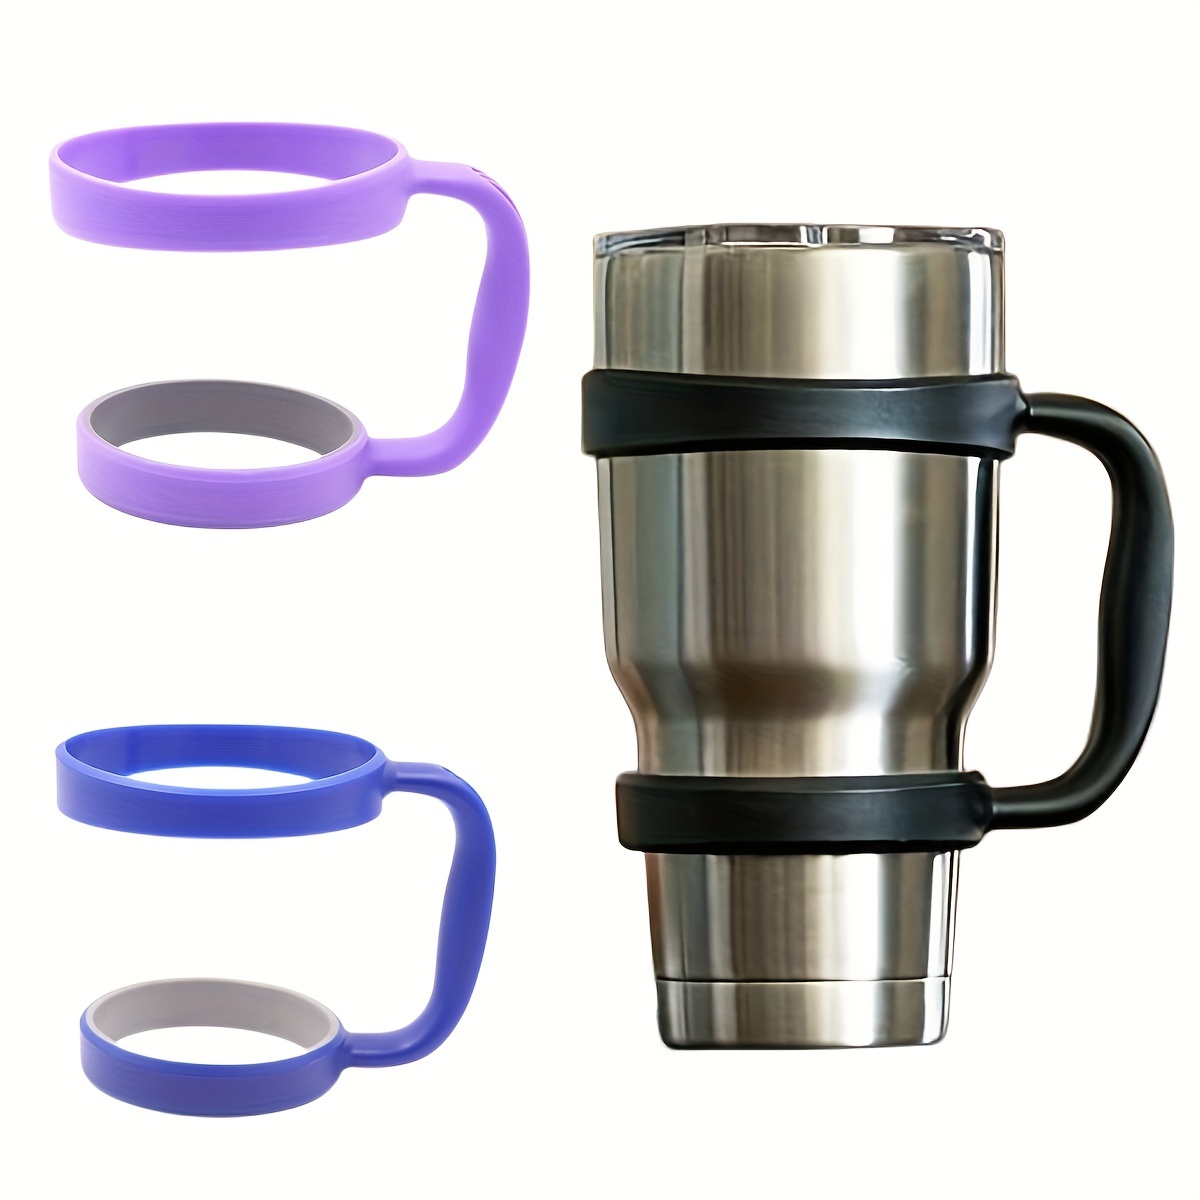 Grip-It YETI Tumbler Cup Handle for 30oz Rambler -  Lightweight, Spill Proof Grip For RTIC Cooler Stainless Steel Tumblers,  SIC, Ozark Trail & Travel Water Coffee Mugs or Flask 